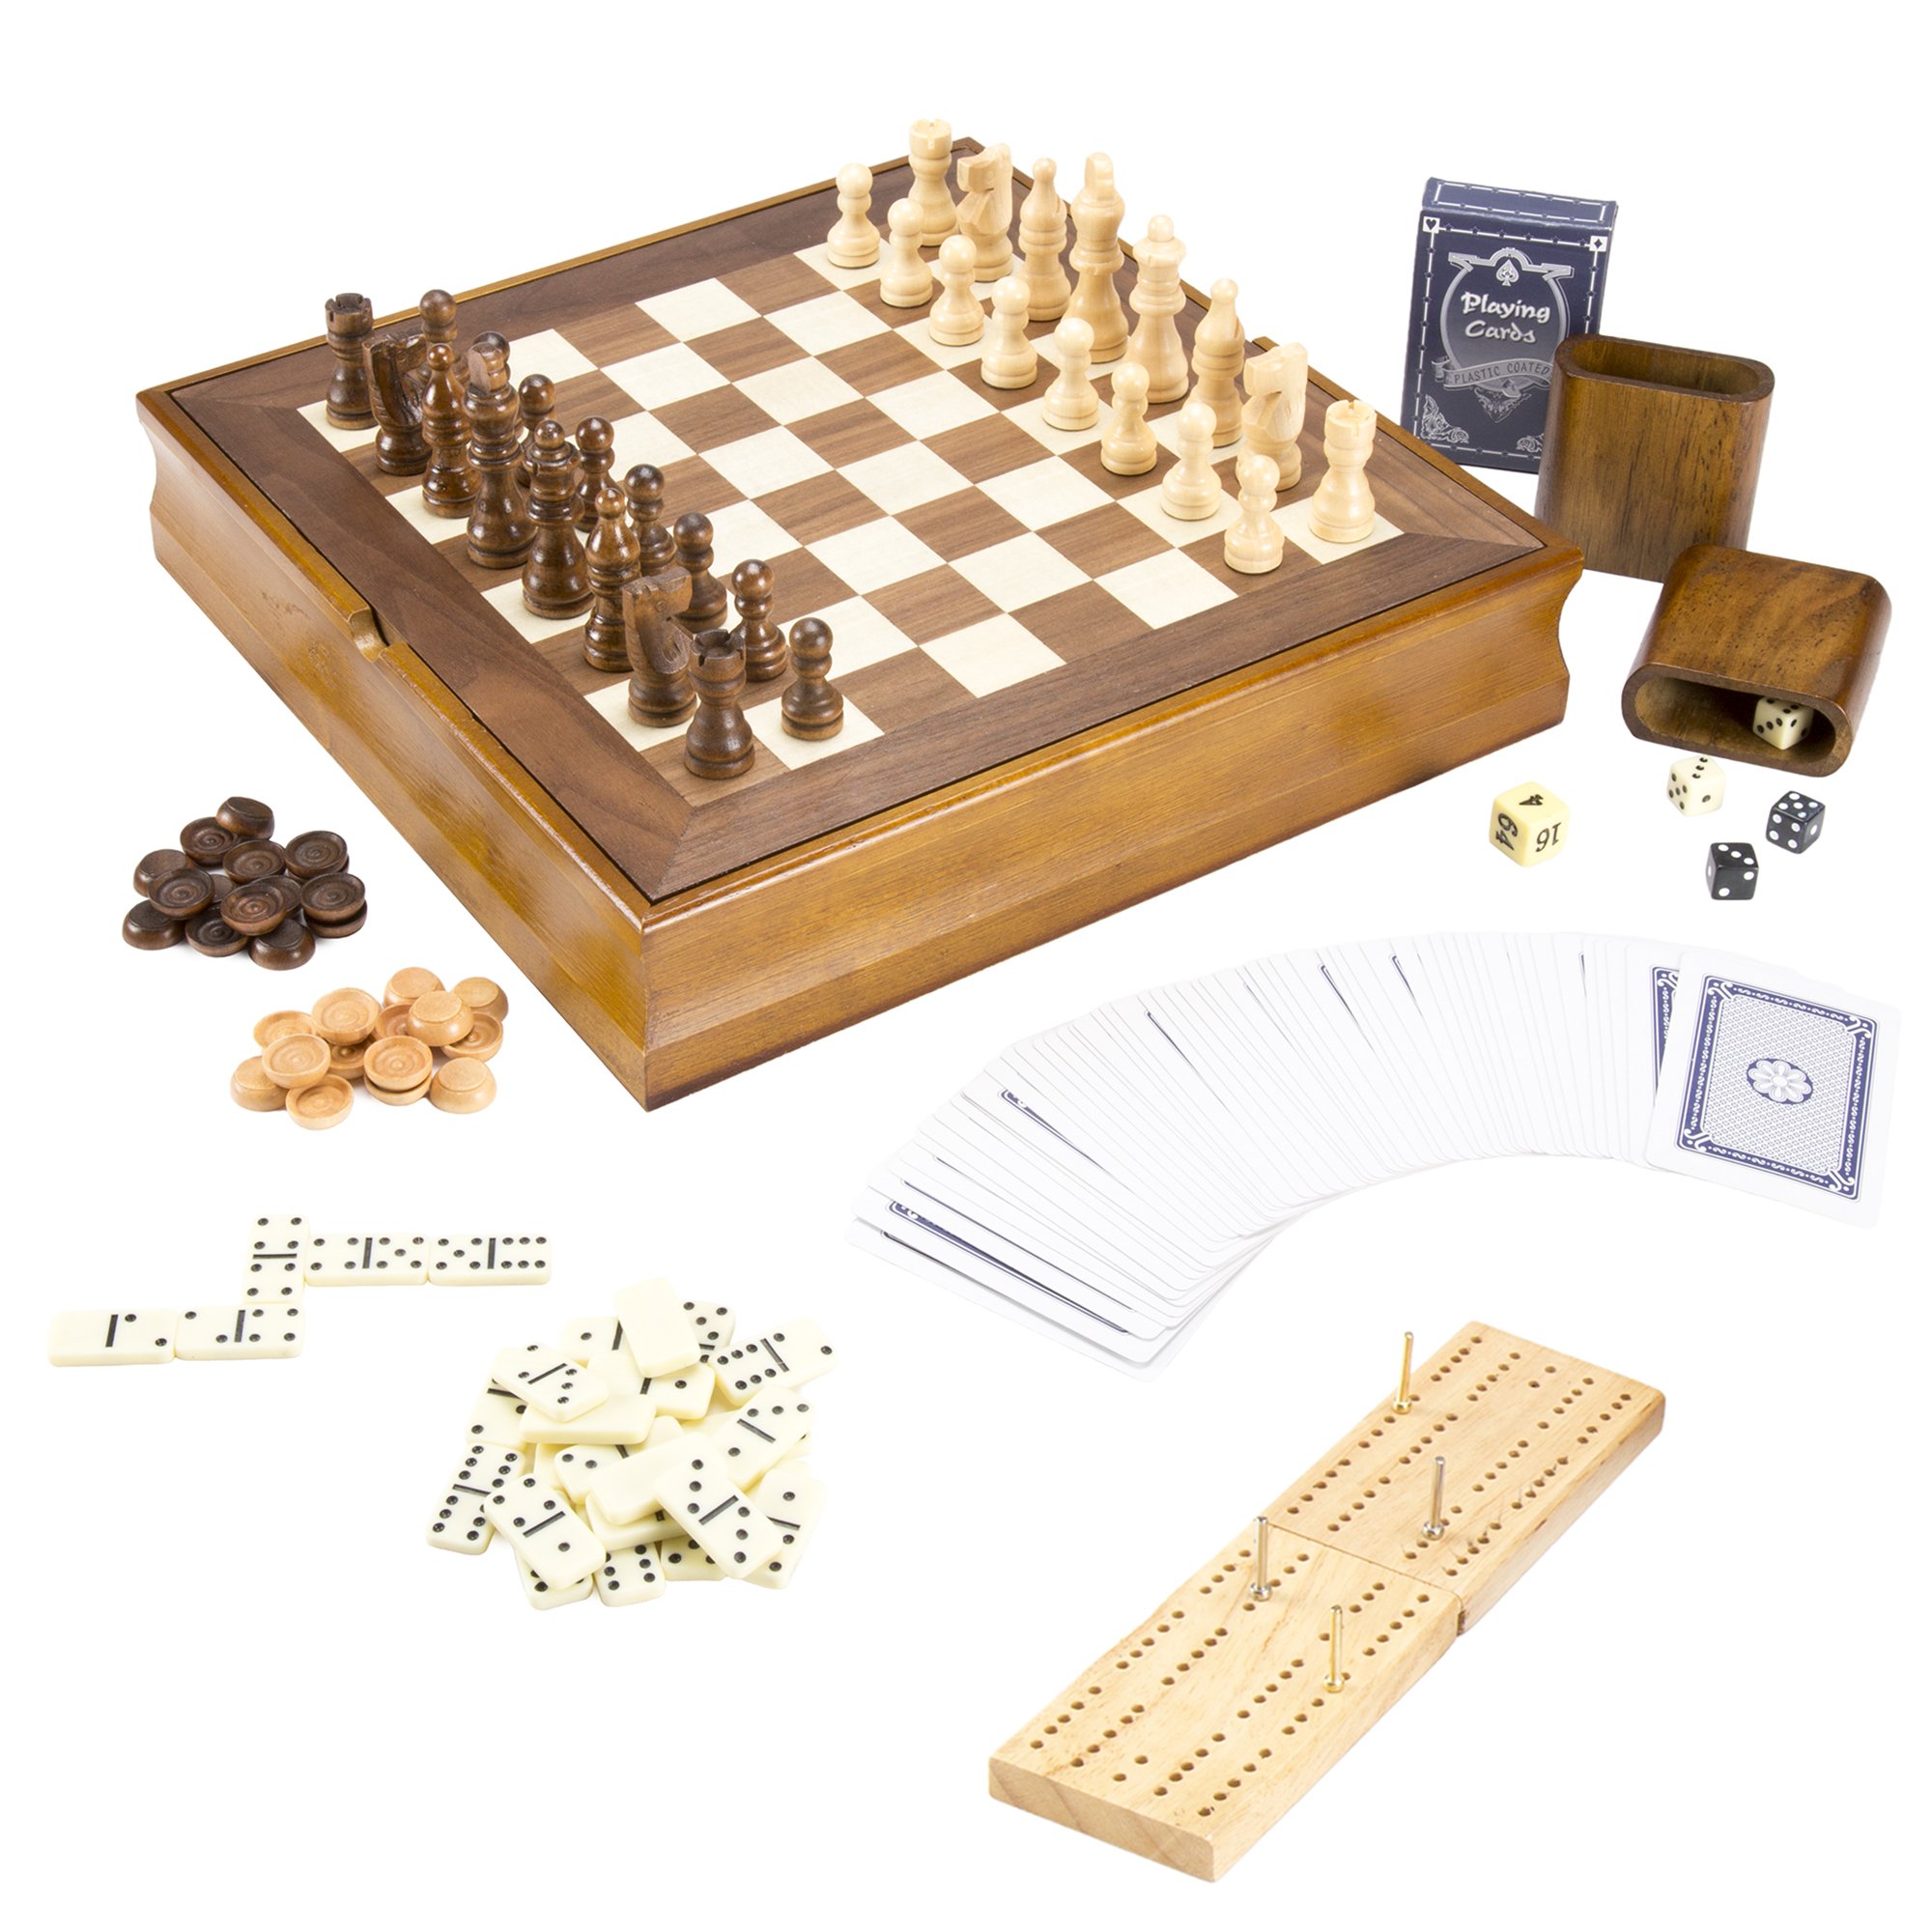 Wood Chess 7 Games in1 Combo Set with Chess, Checkers, Cribbage, Backgammon, Dominos, Poker & Dice - Includes Bonus Deck of Cards!